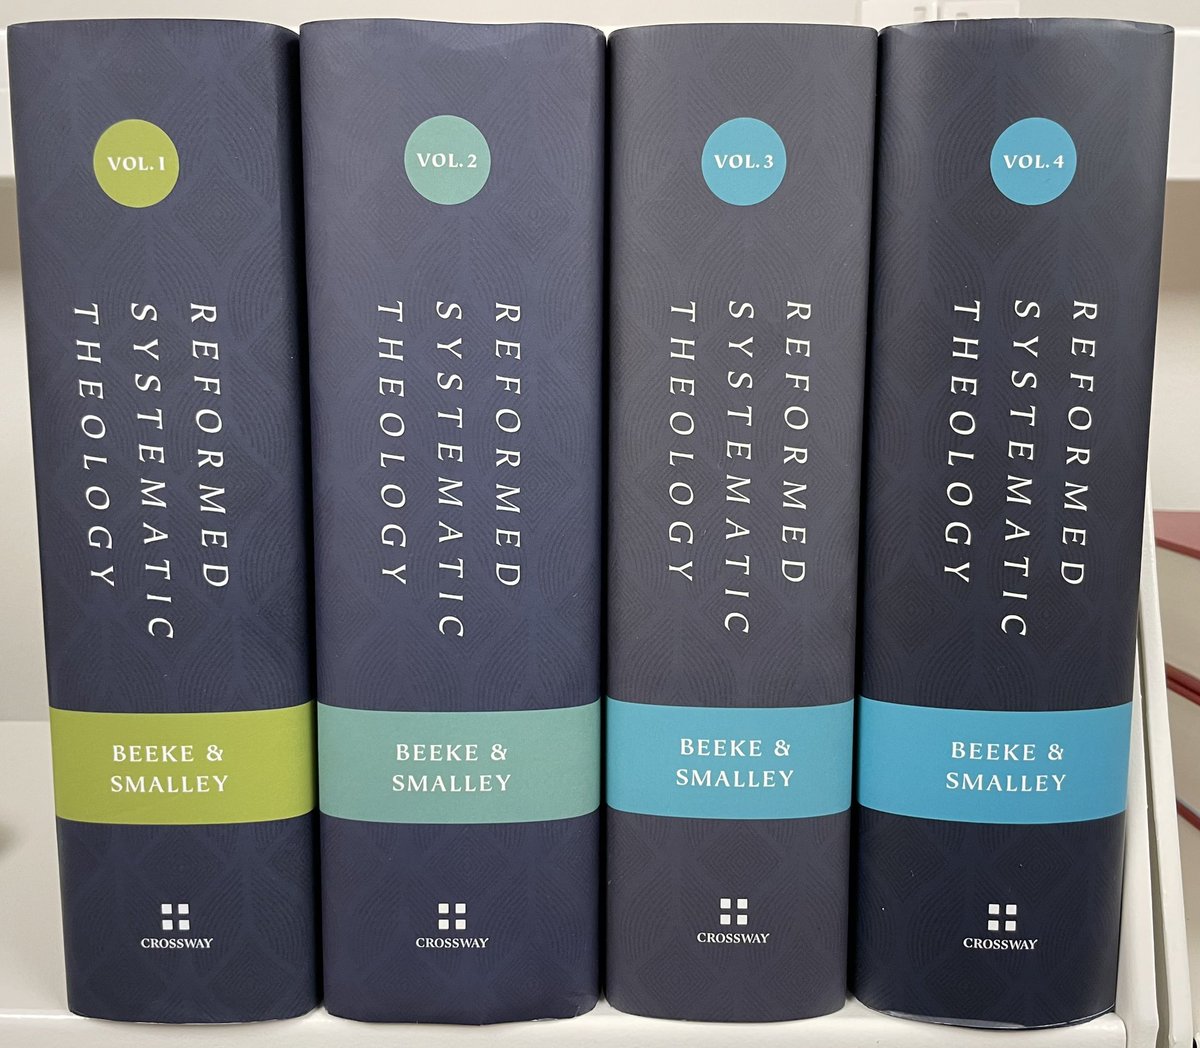 Congratulations to my friend @JoelBeeke & his colleague Paul Smalley on the completion& publication of their Reformed Systematic Theology @crossway Here’s what I said in my endorsement: “Joel Beeke’s and Paul Smalley’s fourth and final volume of their Reformed Systematic